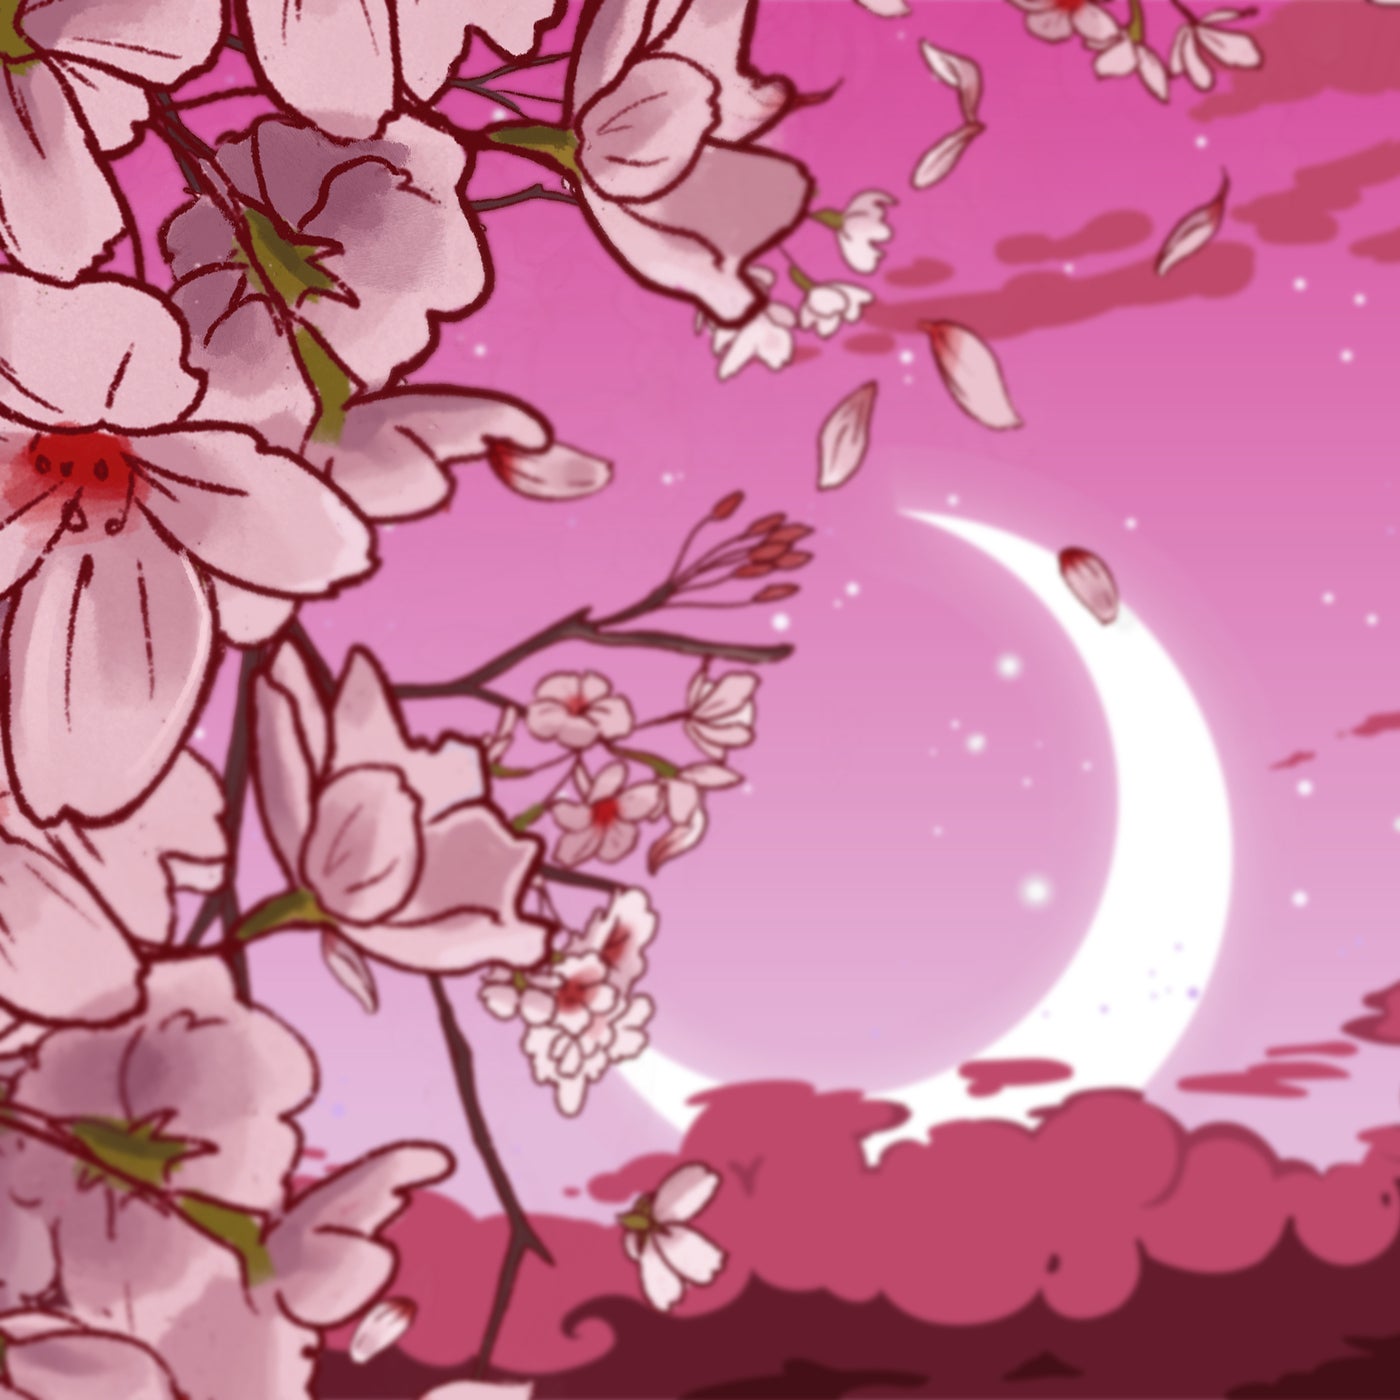 Cherry Blossoms by Shady Moon on Beatsource